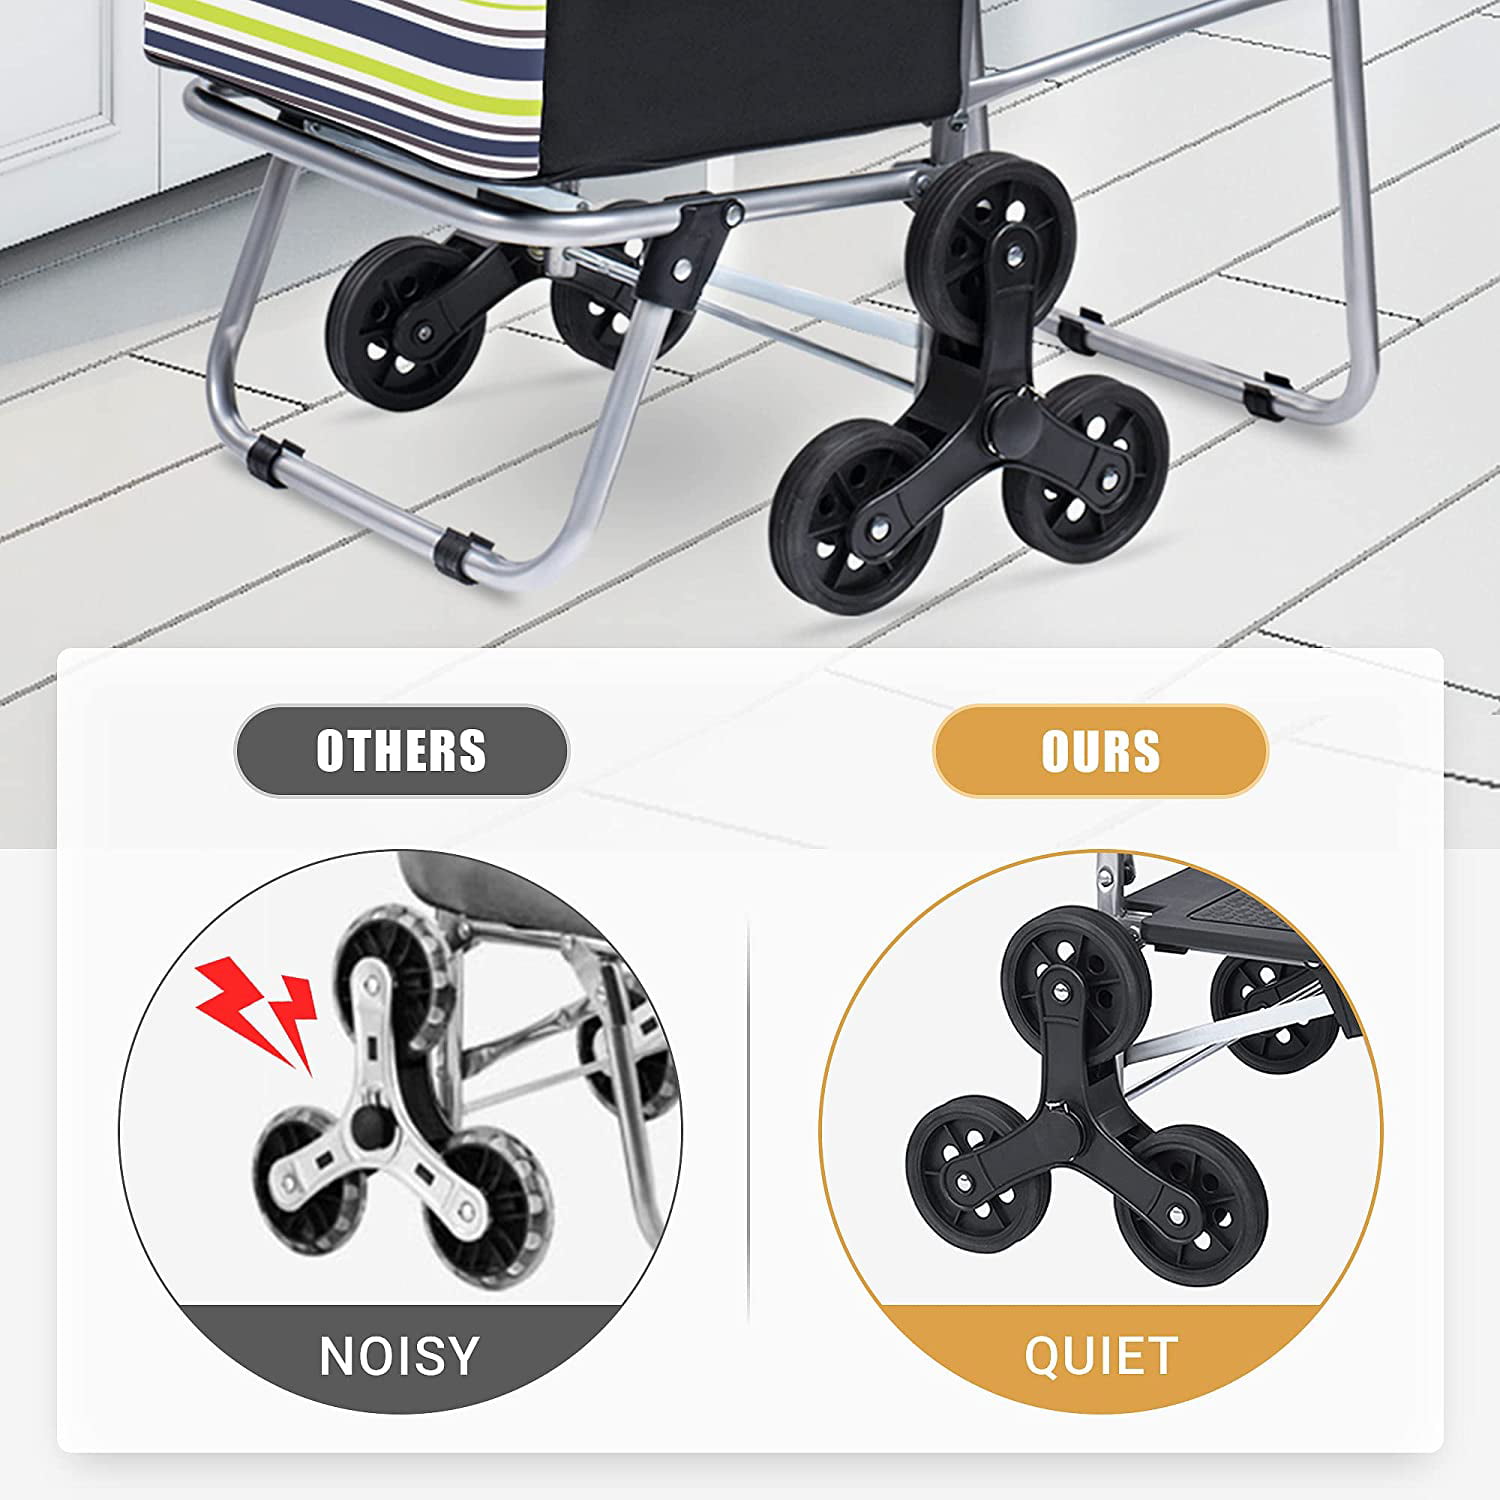 Shopping Trolley with Iron Frame for Heavy Duty Stair Climber Cart with Tri-Wheel Cosaving Shopping Cart Foldable Stripe Bigger Waterproof Shopping Bag 